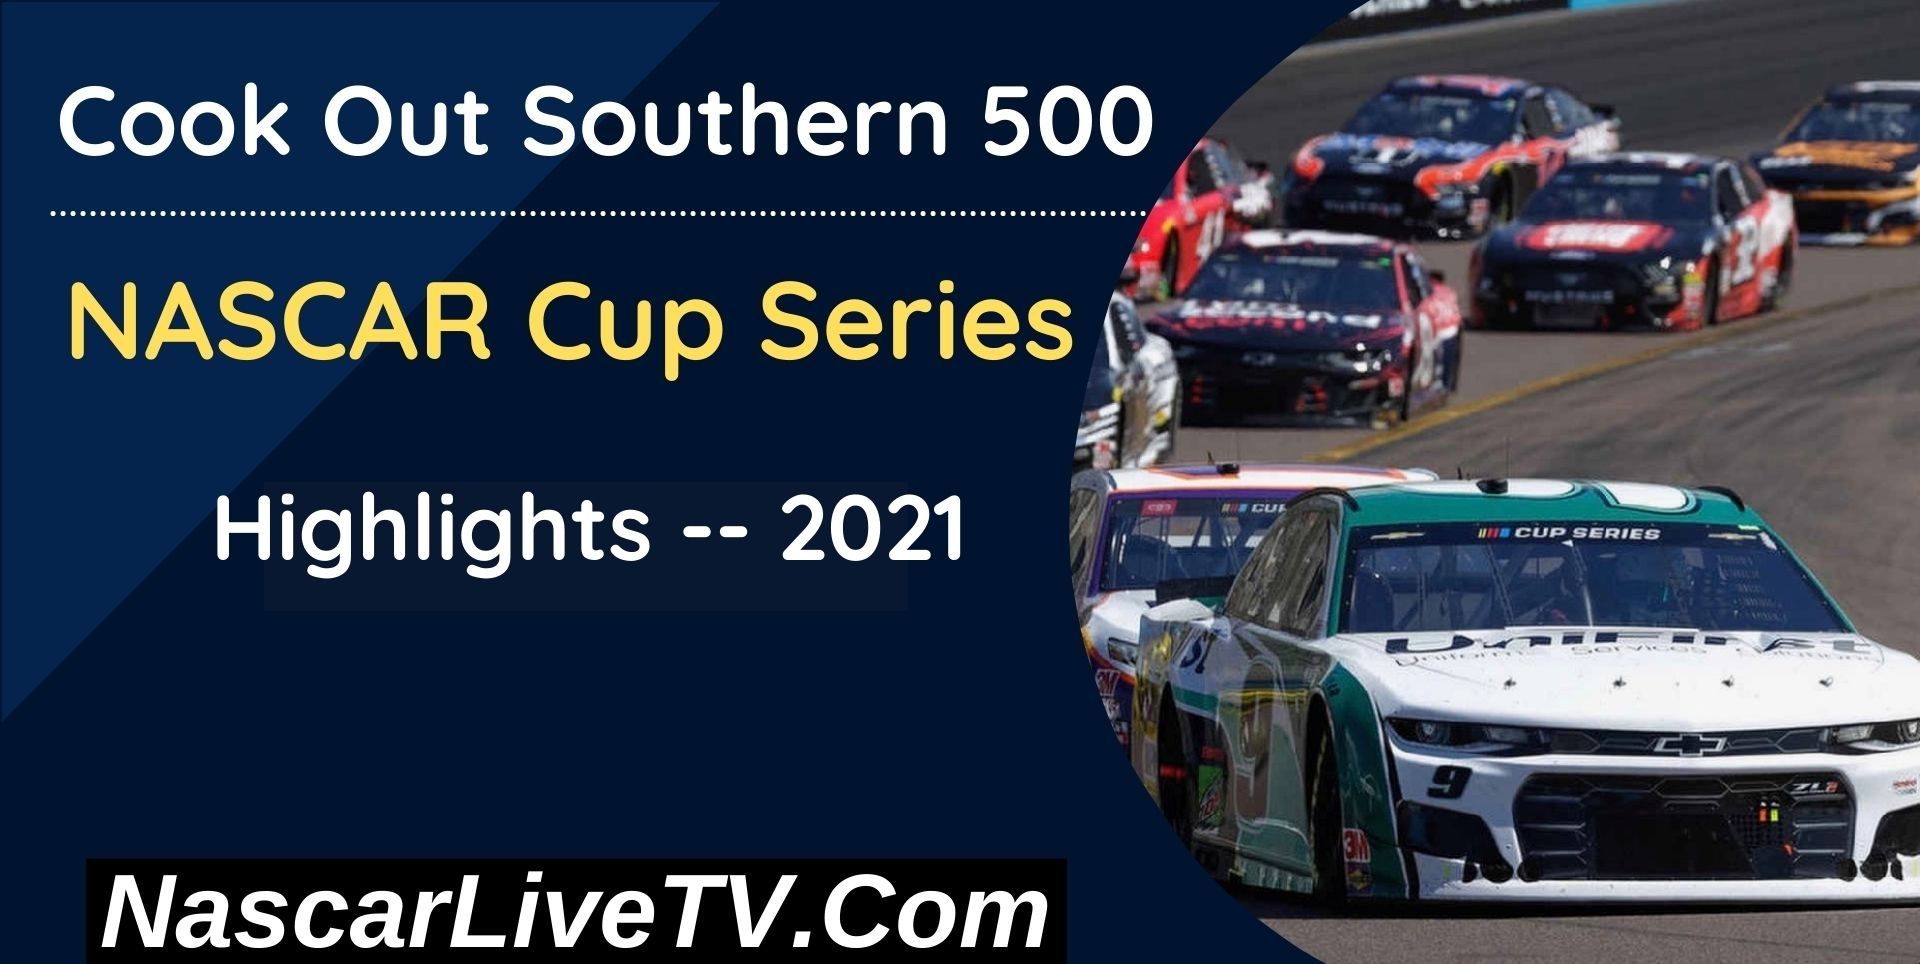 Cook Out Southern 500 Highlights NASCAR Cup Series 2021